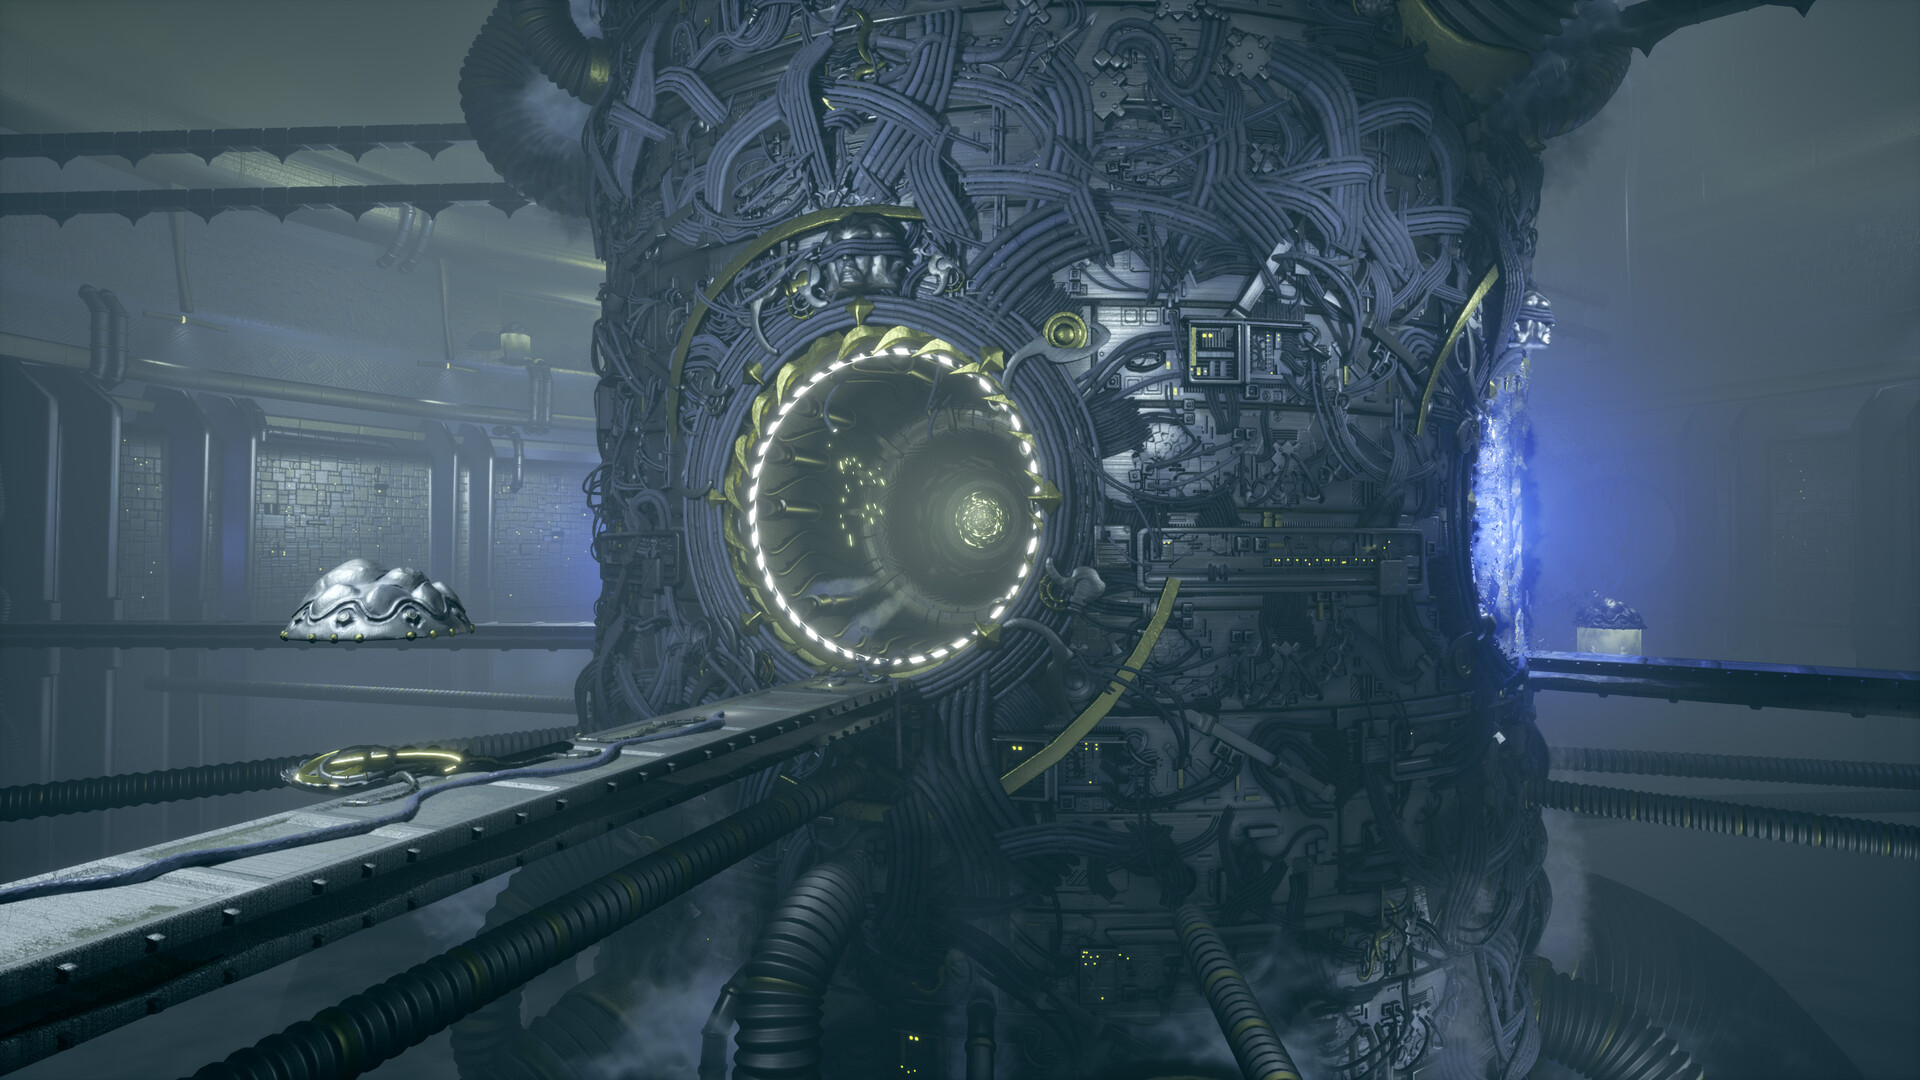 The side of the portal megastructure that has an opening malfunctioning. Next to the long platform leading to the portal diaphragm, there are now cables and an empty floating platform otherwise used by people for transportation and maintenance.